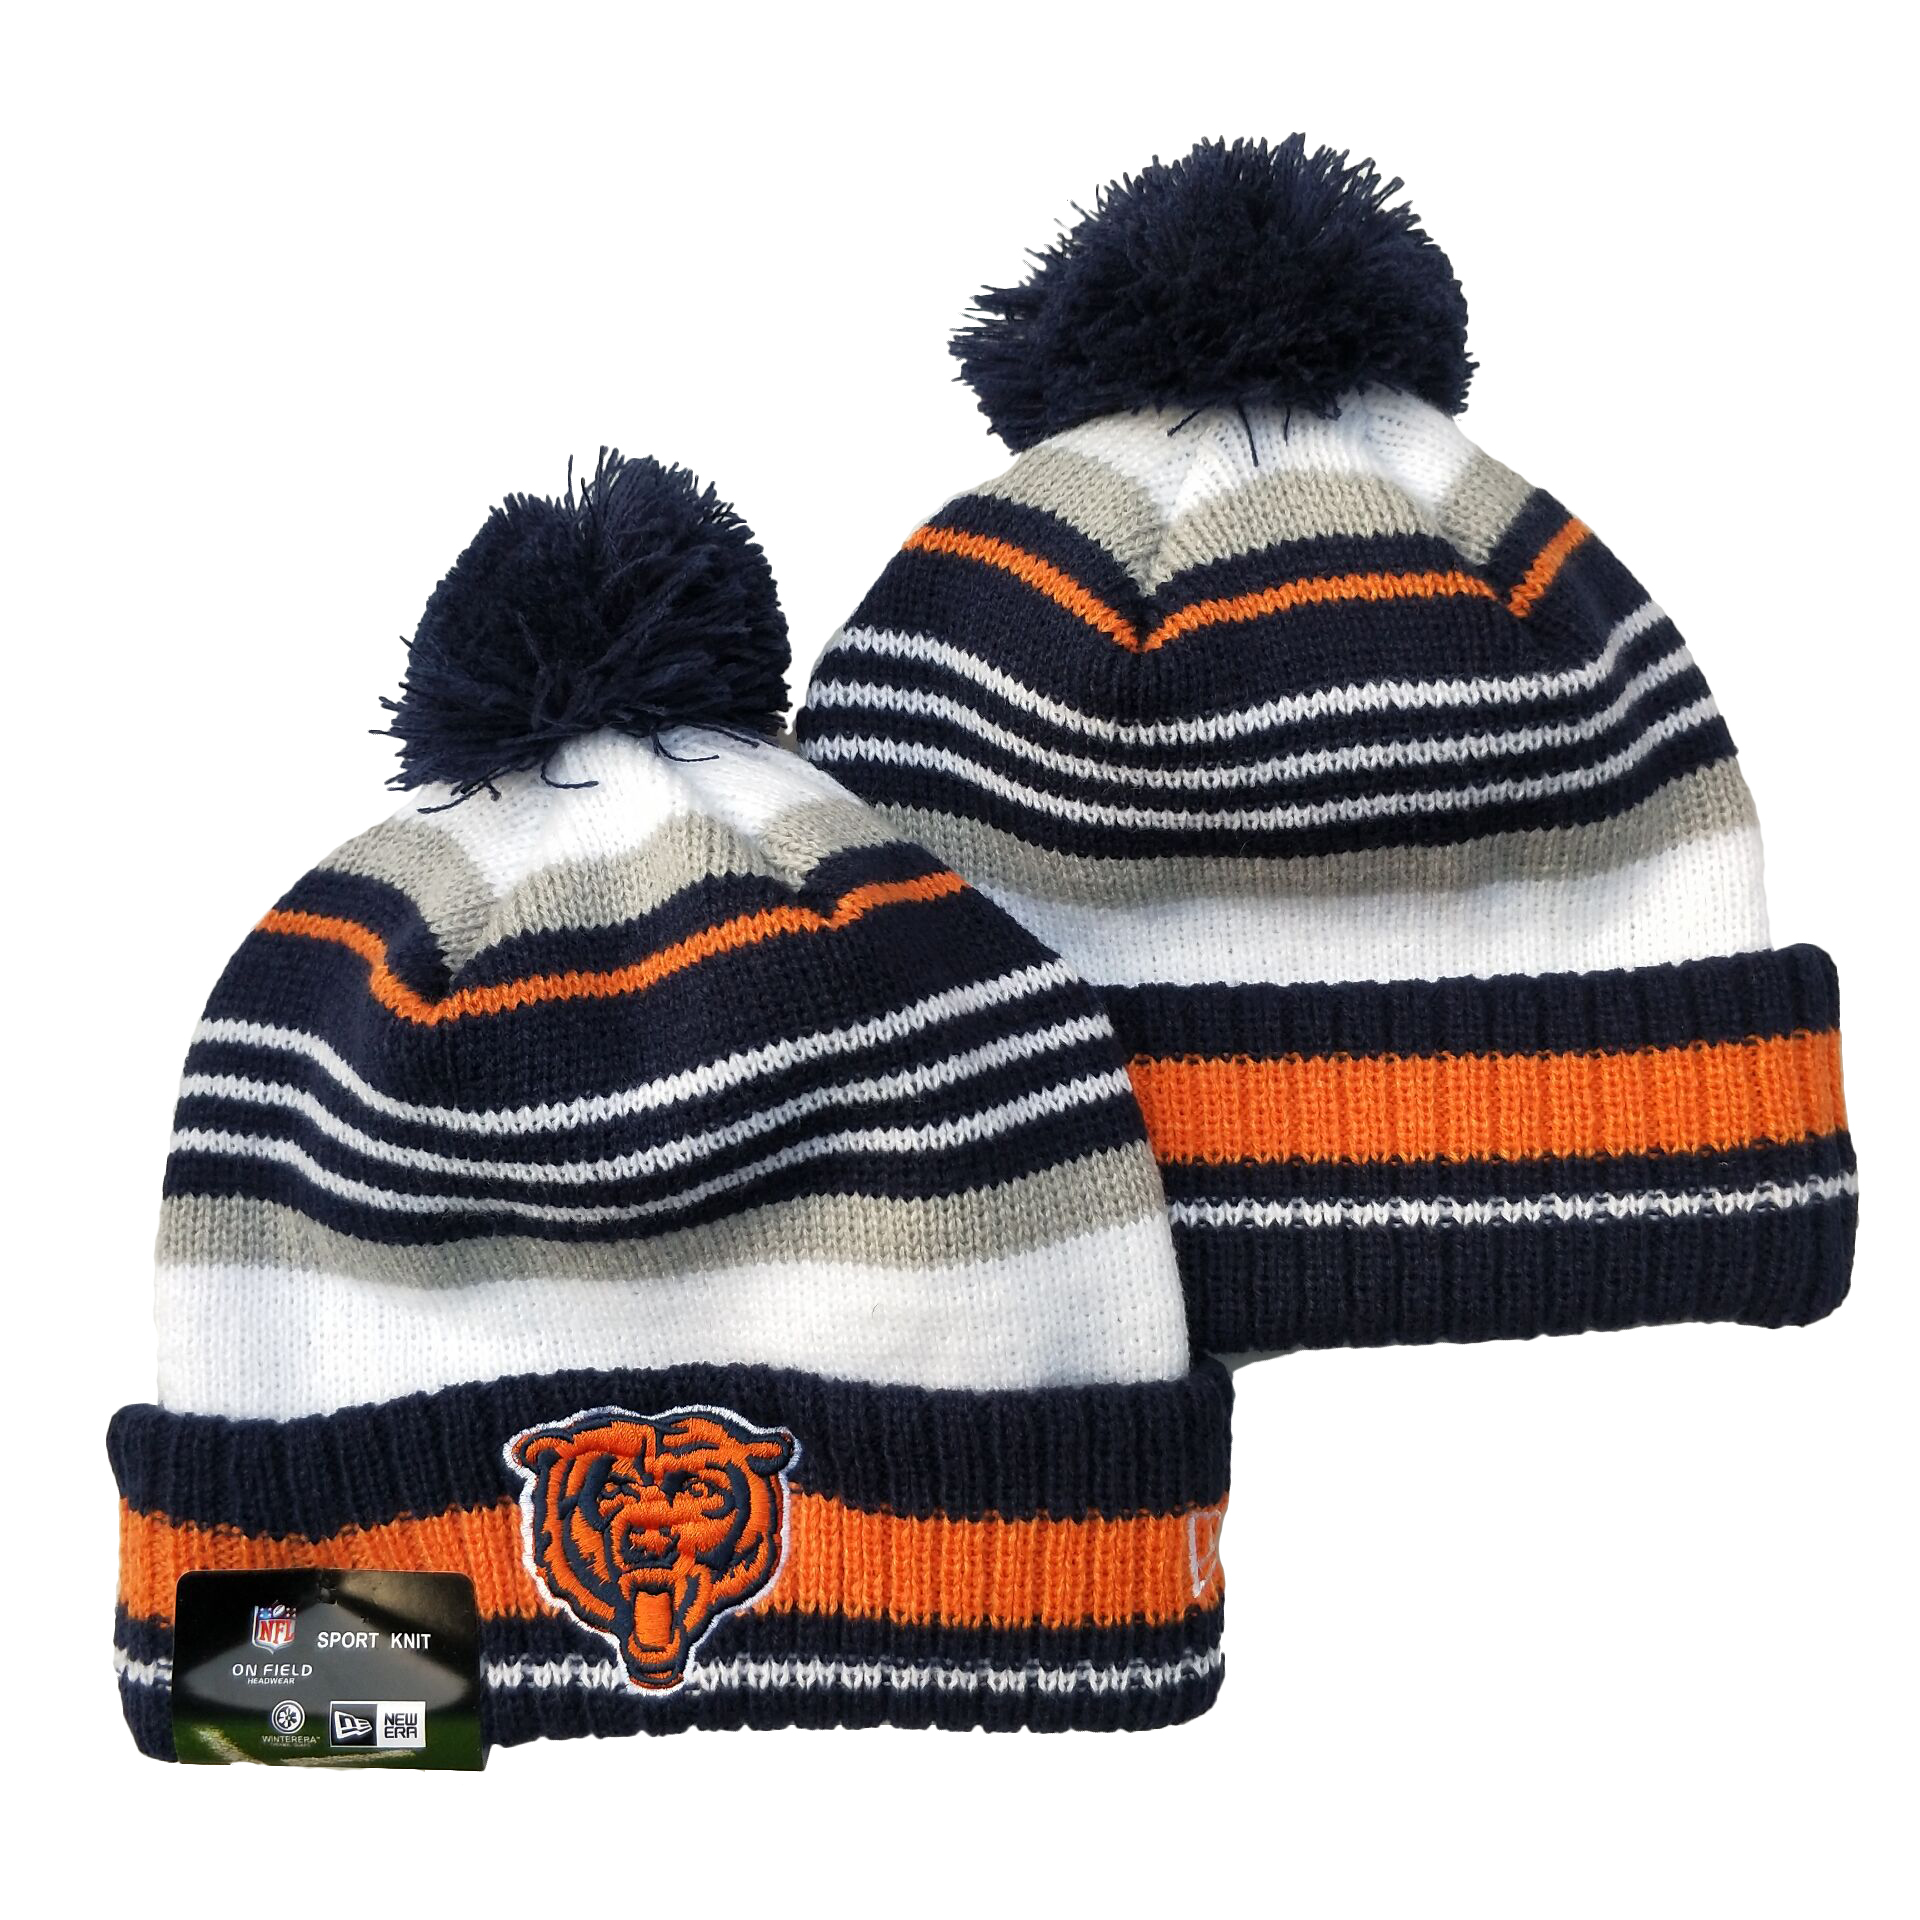 NFL Chicago Bears Beanies Knit Hats-YD904